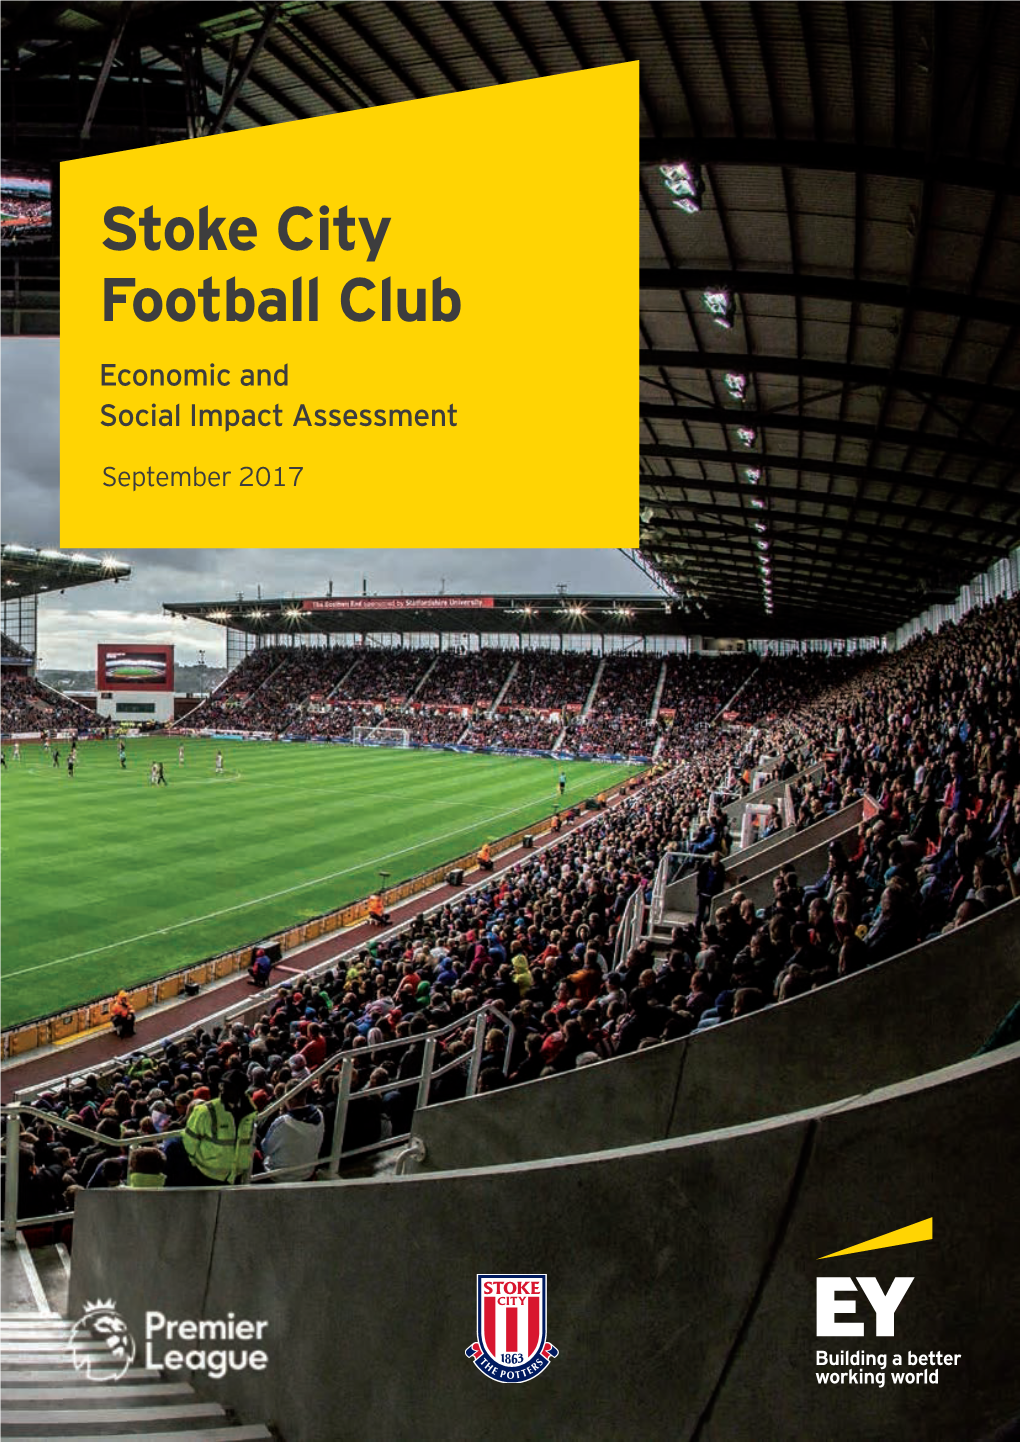 Stoke City Football Club Economic and Social Impact Assessment